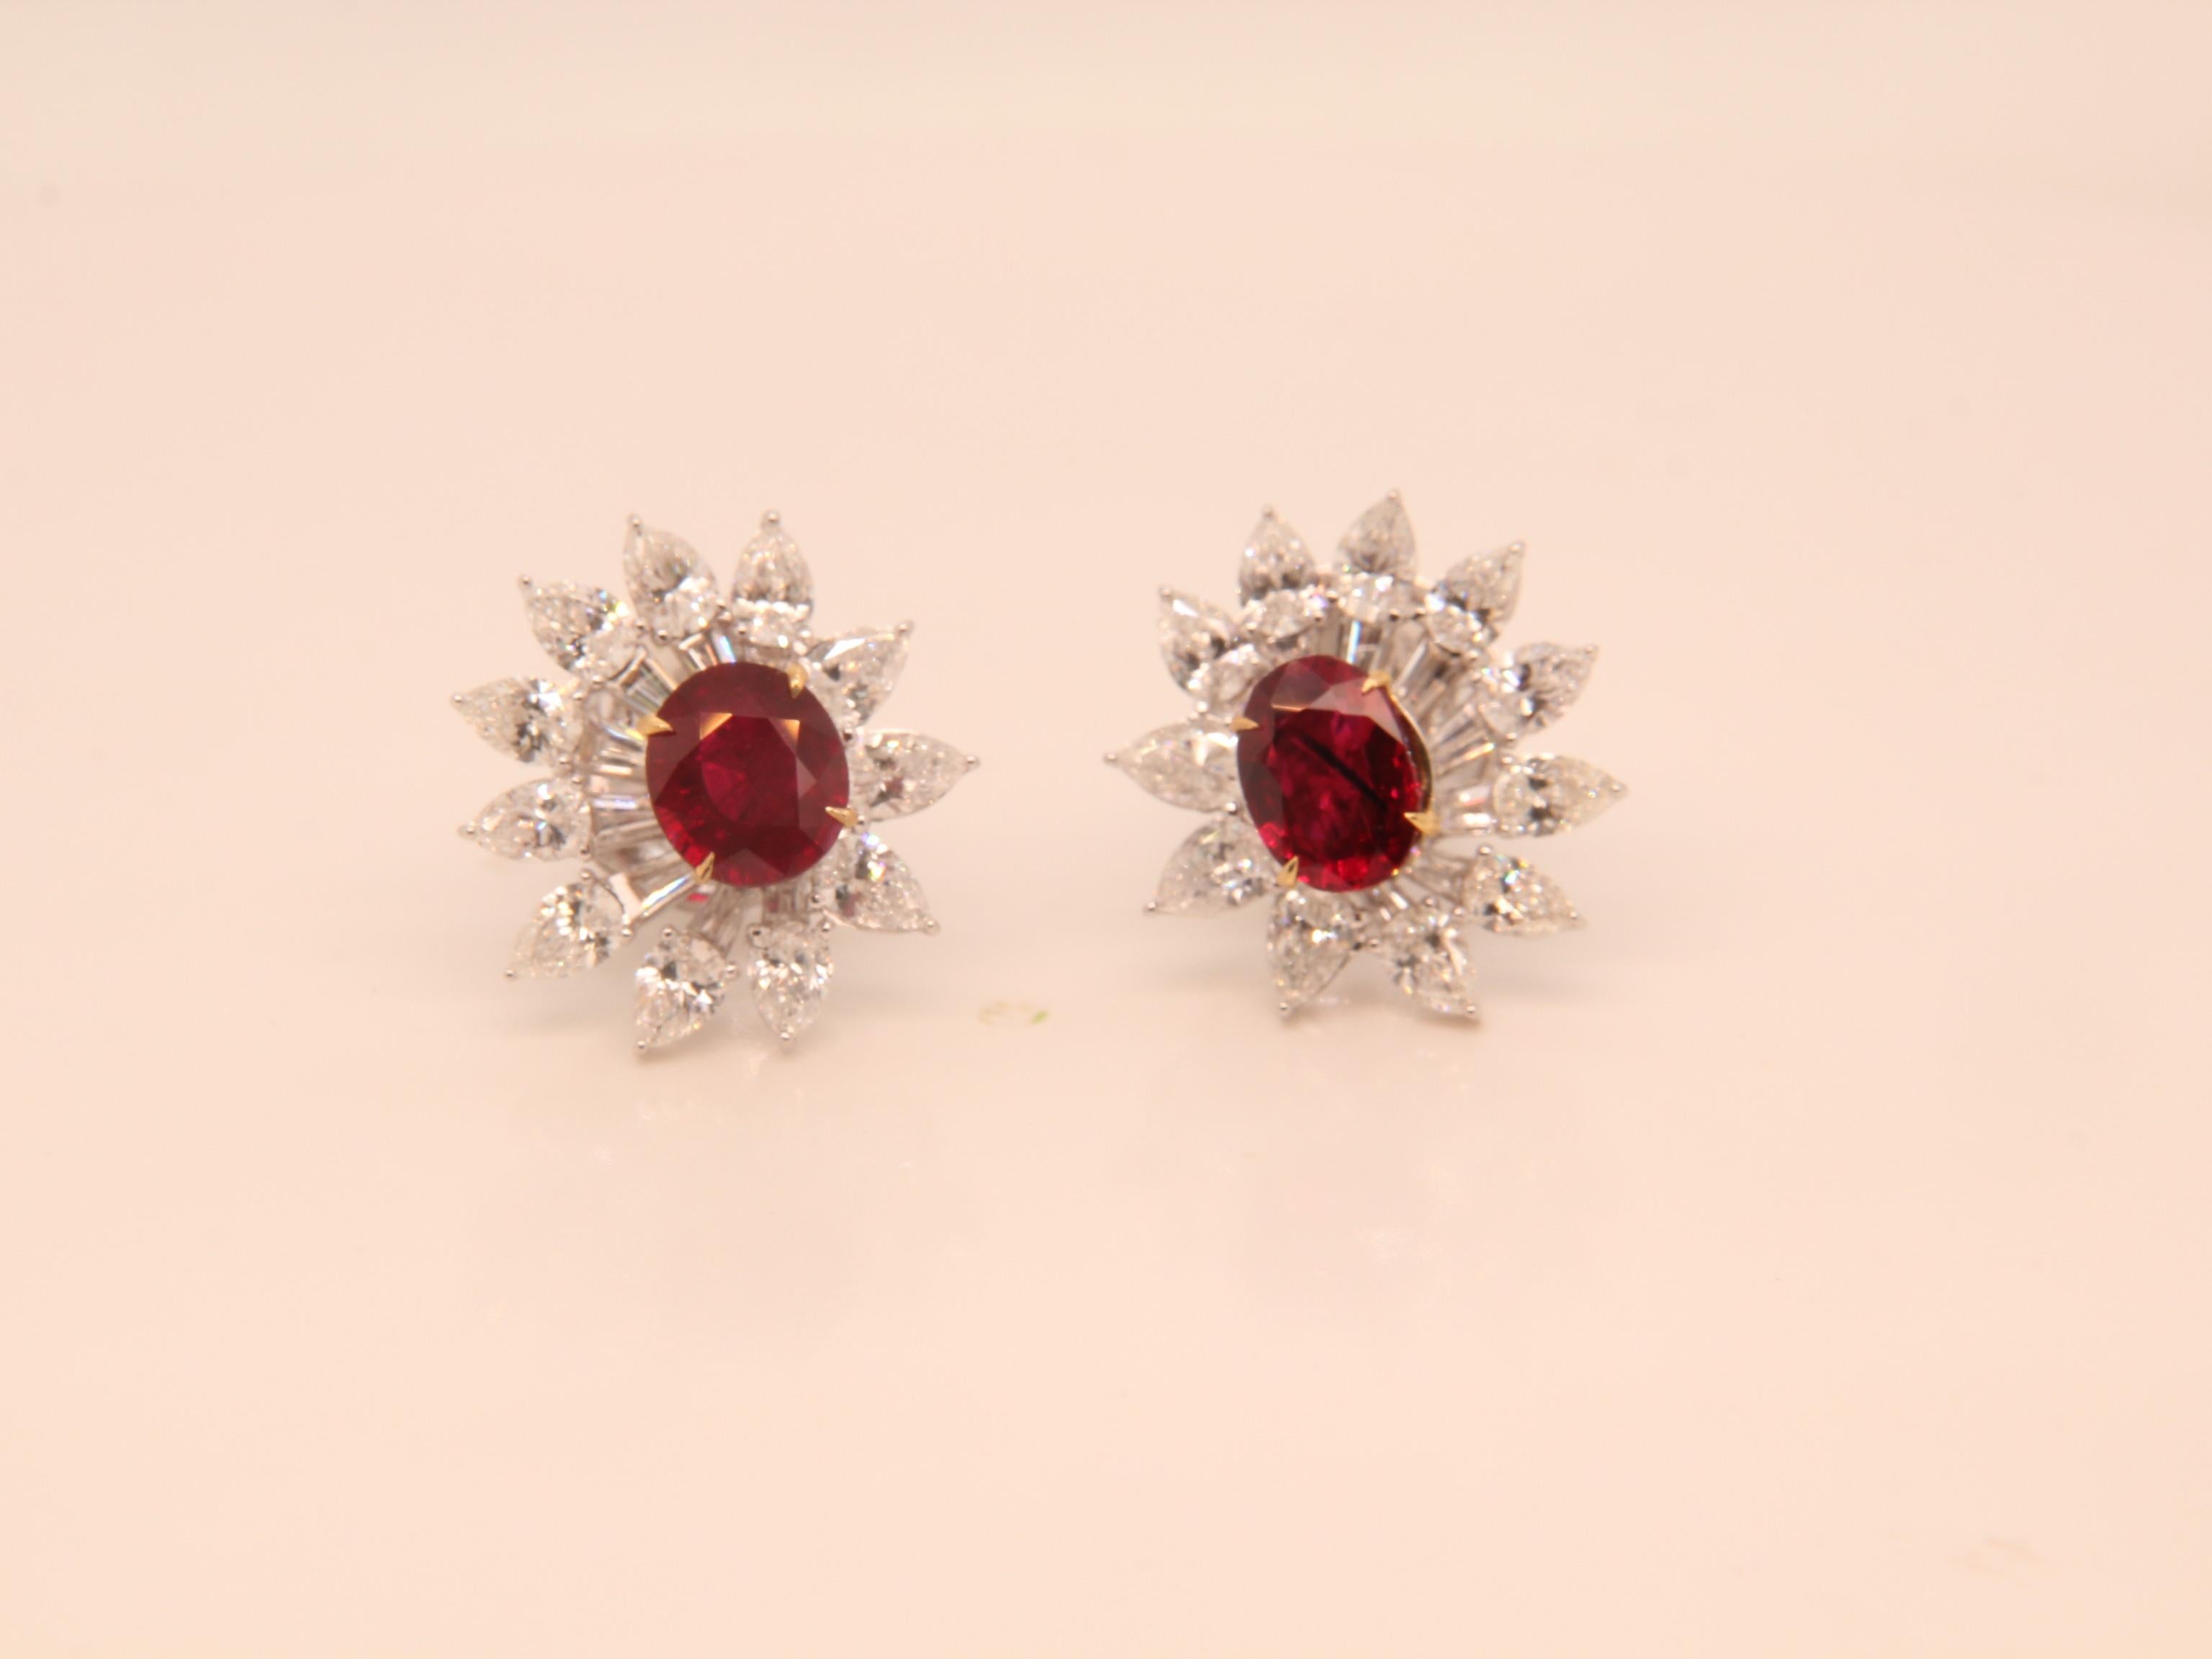 A brand new ruby and diamond earring by Rewa. The Burmese 'Pigeon Blood' ruby weigh 1.19 and 1.00 carat each and they are both certified by Gem Research Swisslab (GRS). The rubies are surrounded by 2.94 carat diamonds studded on 18k white gold 6.16